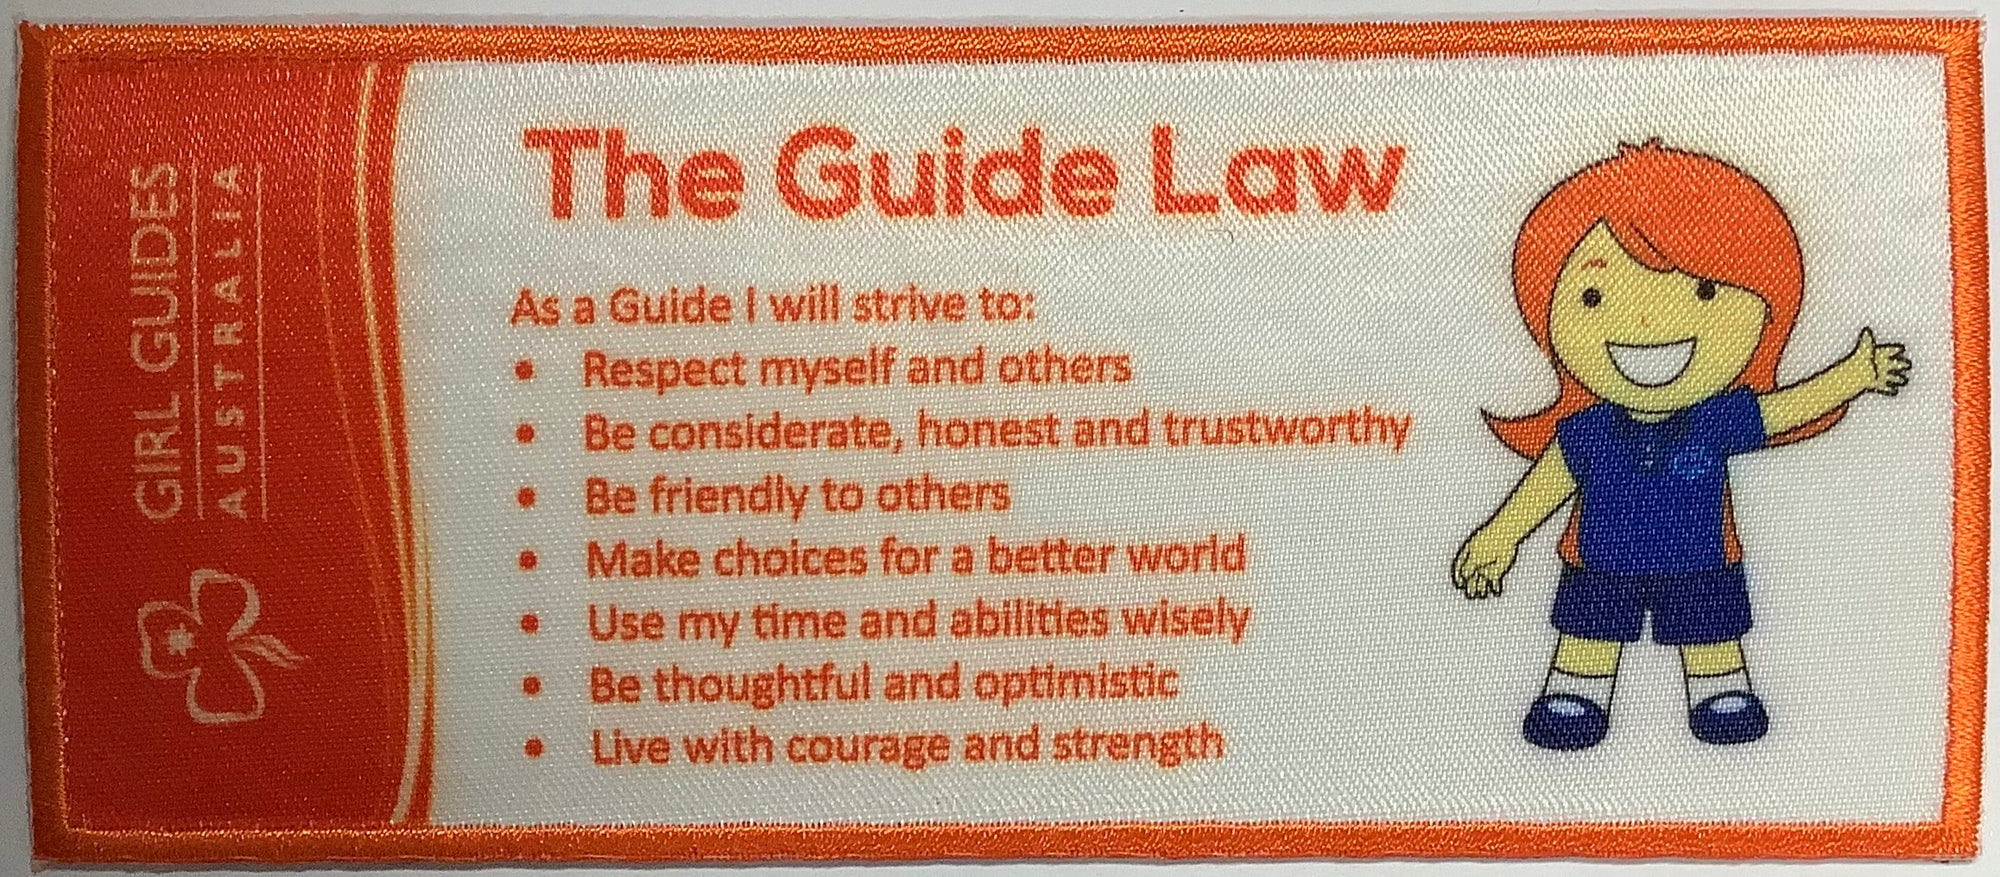 a rectangle shaped badge that is sturdy enough to be a bookmark with the Guide Law and a guide